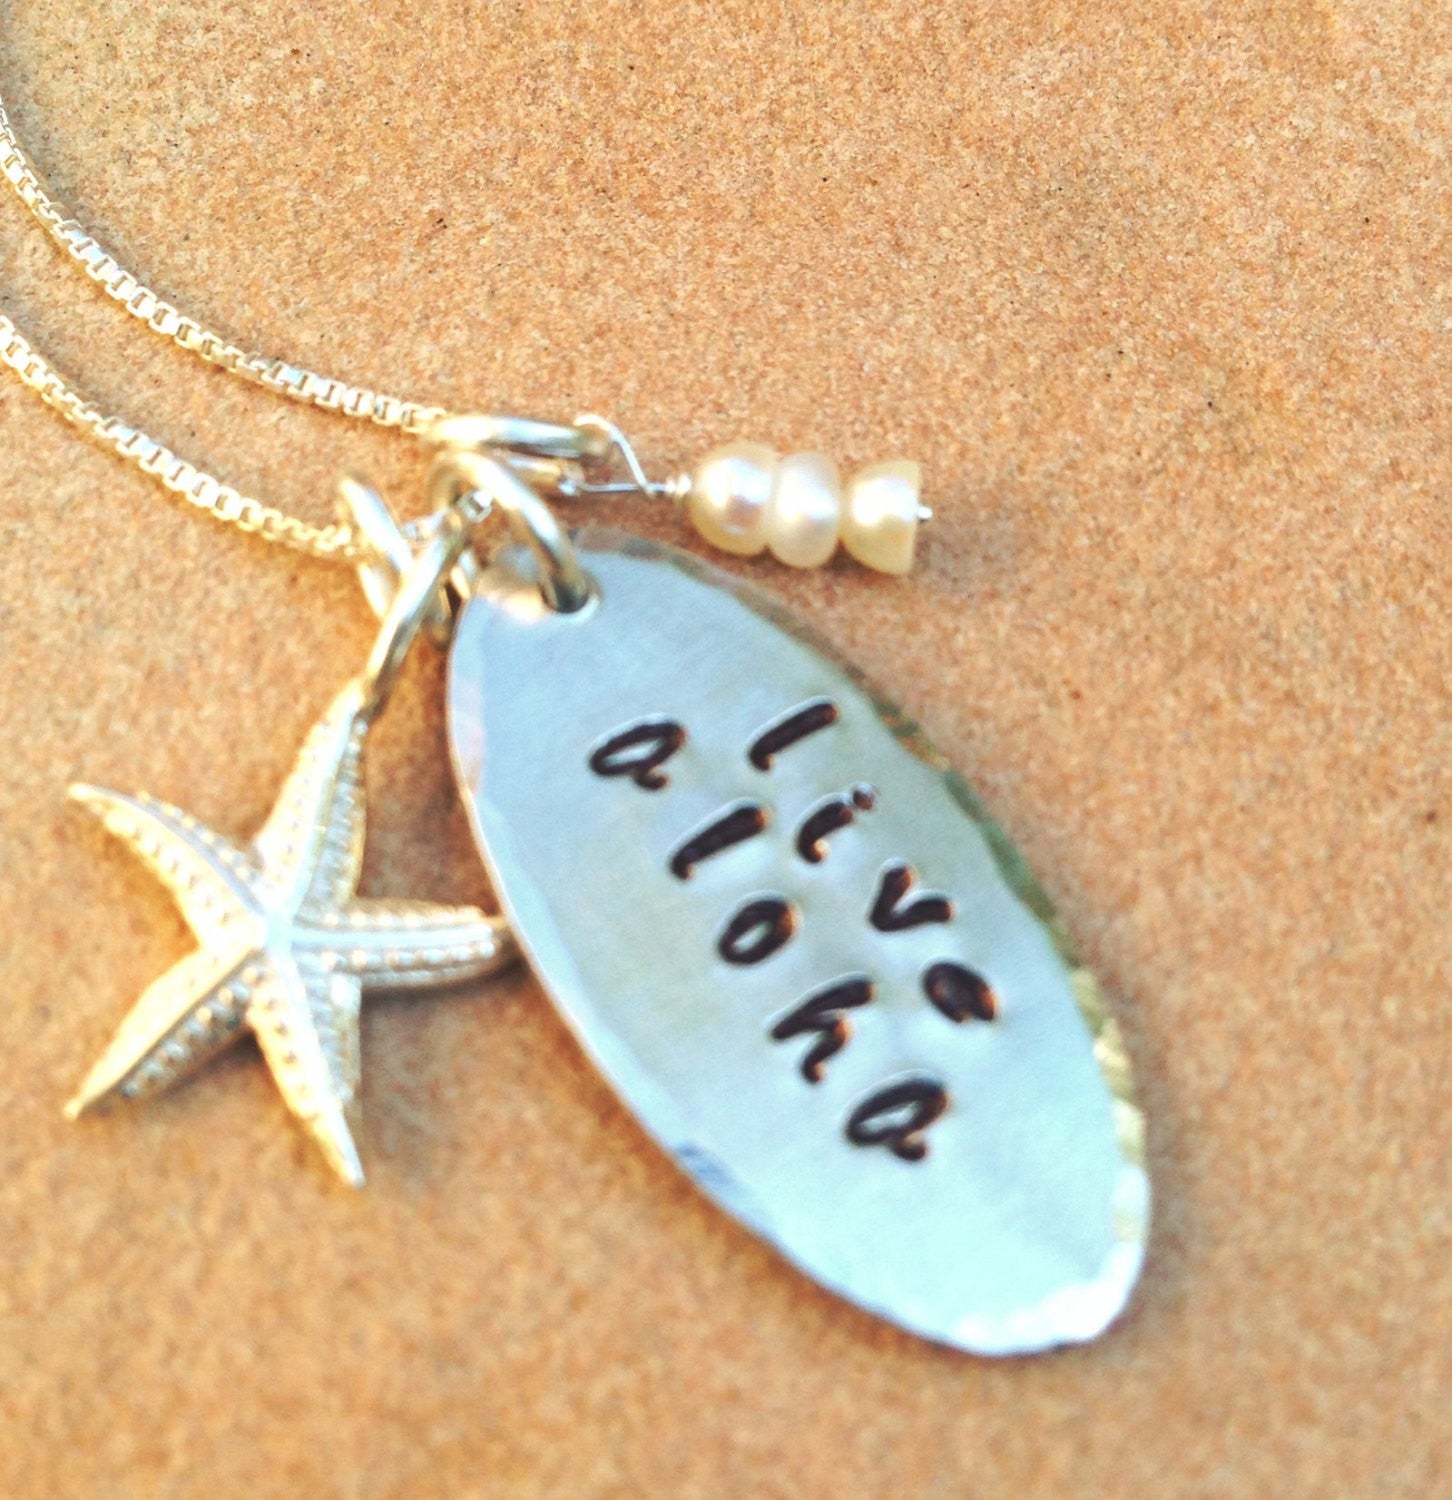 live aloha, Hawaiian Wedding, necklace, Hawaiian necklace, aloha necklace, gifts for her, Hawaiian, Mothers Day, personalized gifts - Natashaaloha, jewelry, bracelets, necklace, keychains, fishing lures, gifts for men, charms, personalized, 